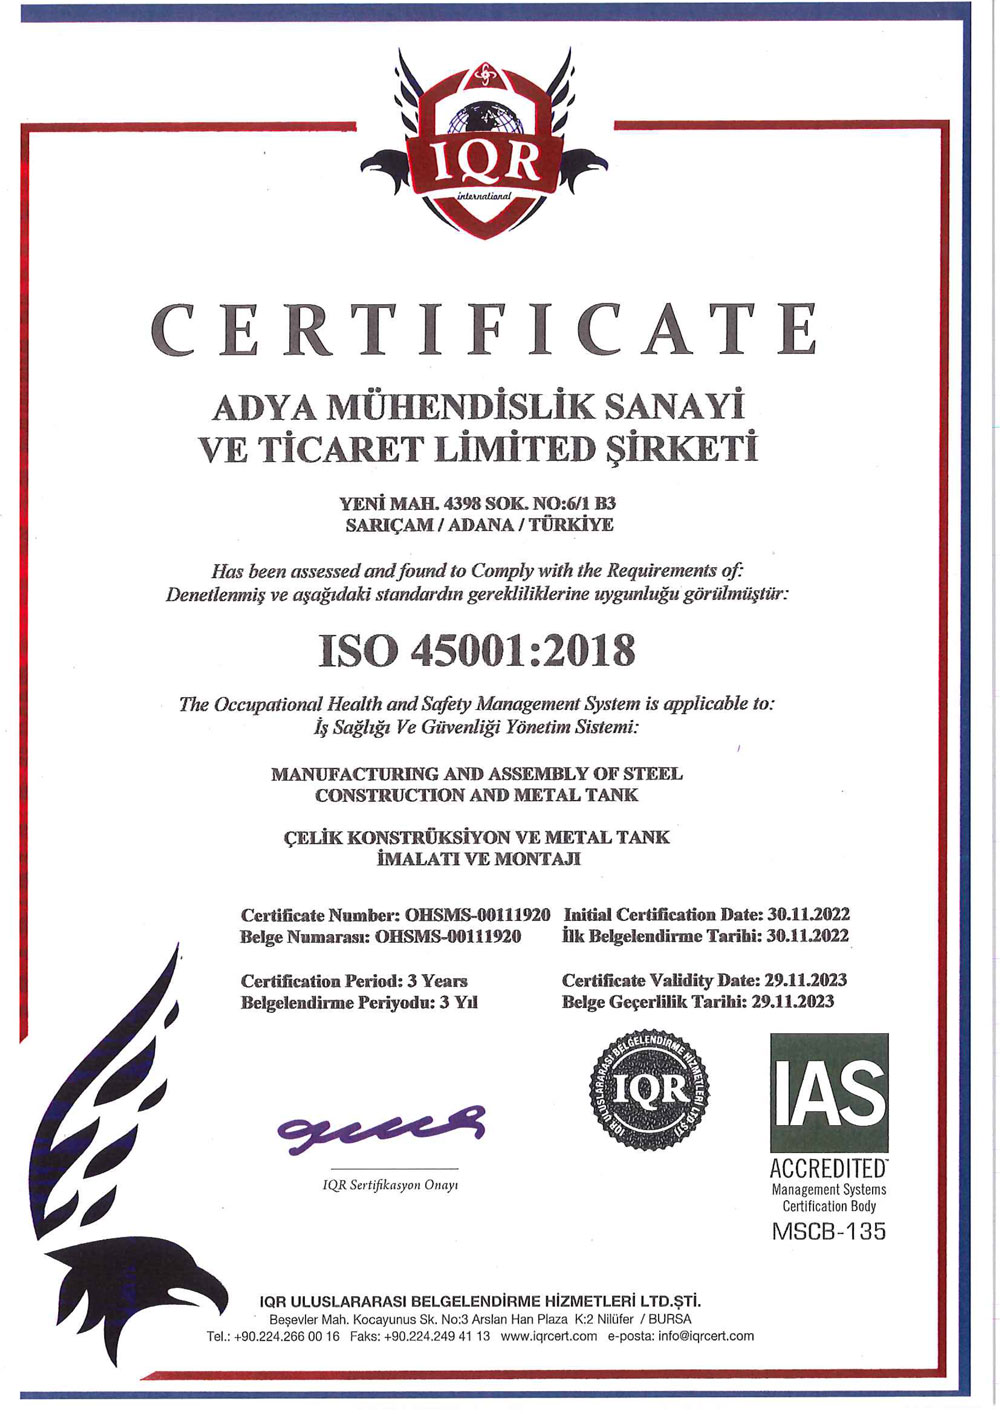 ISO 45001 2018